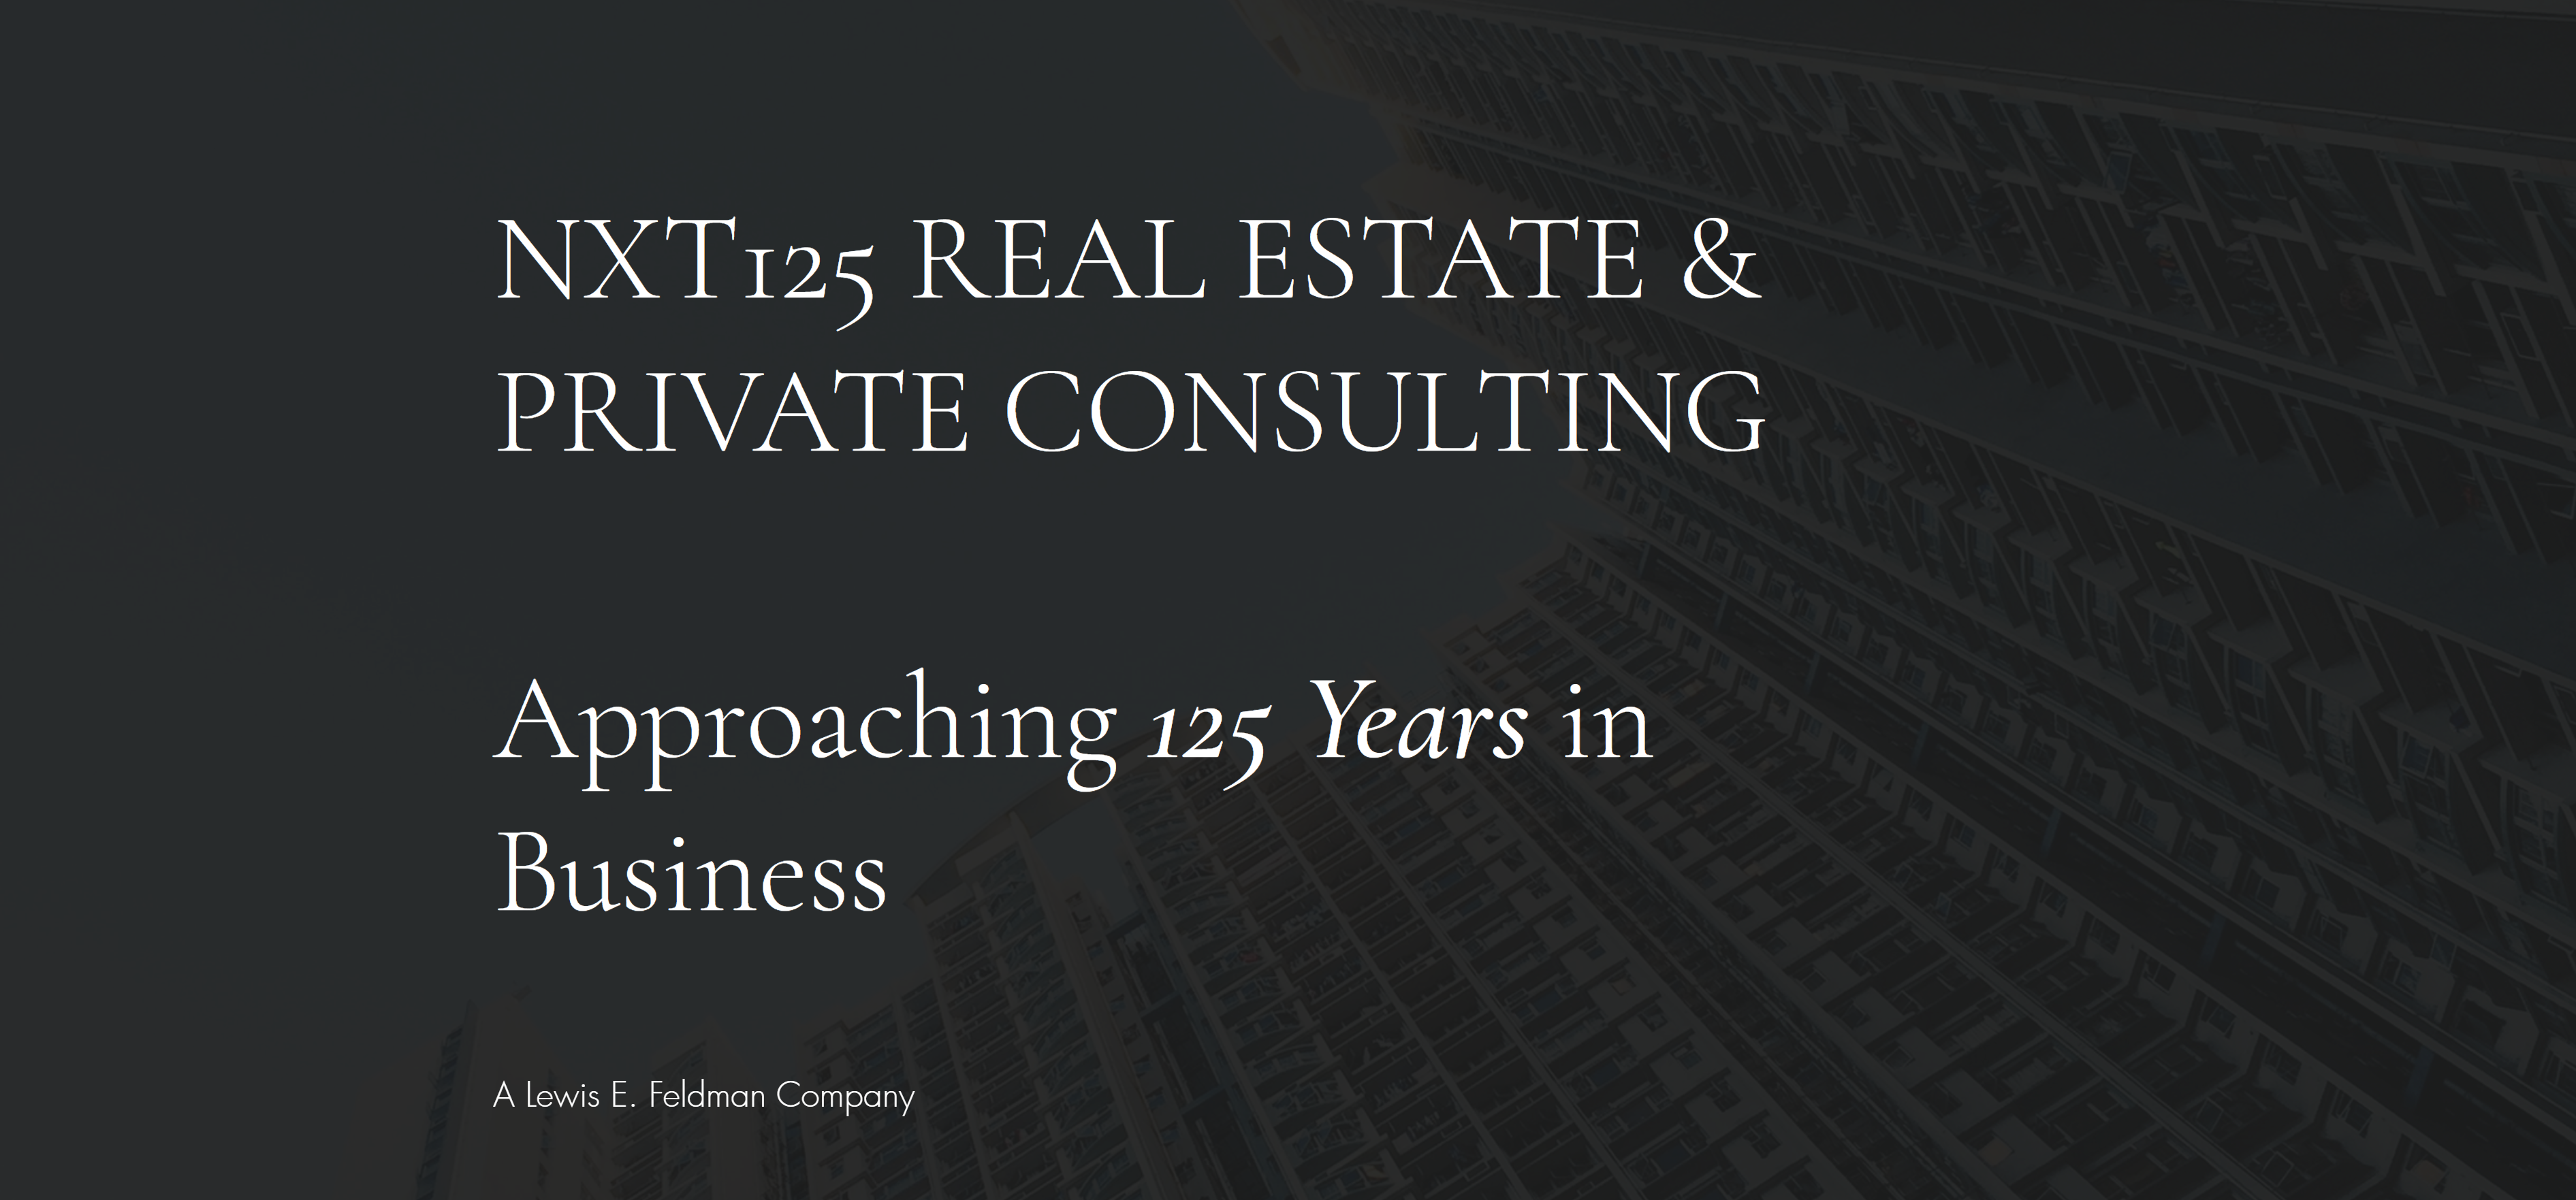 NXT125 Real Estate & Private Consulting on blendnewyork